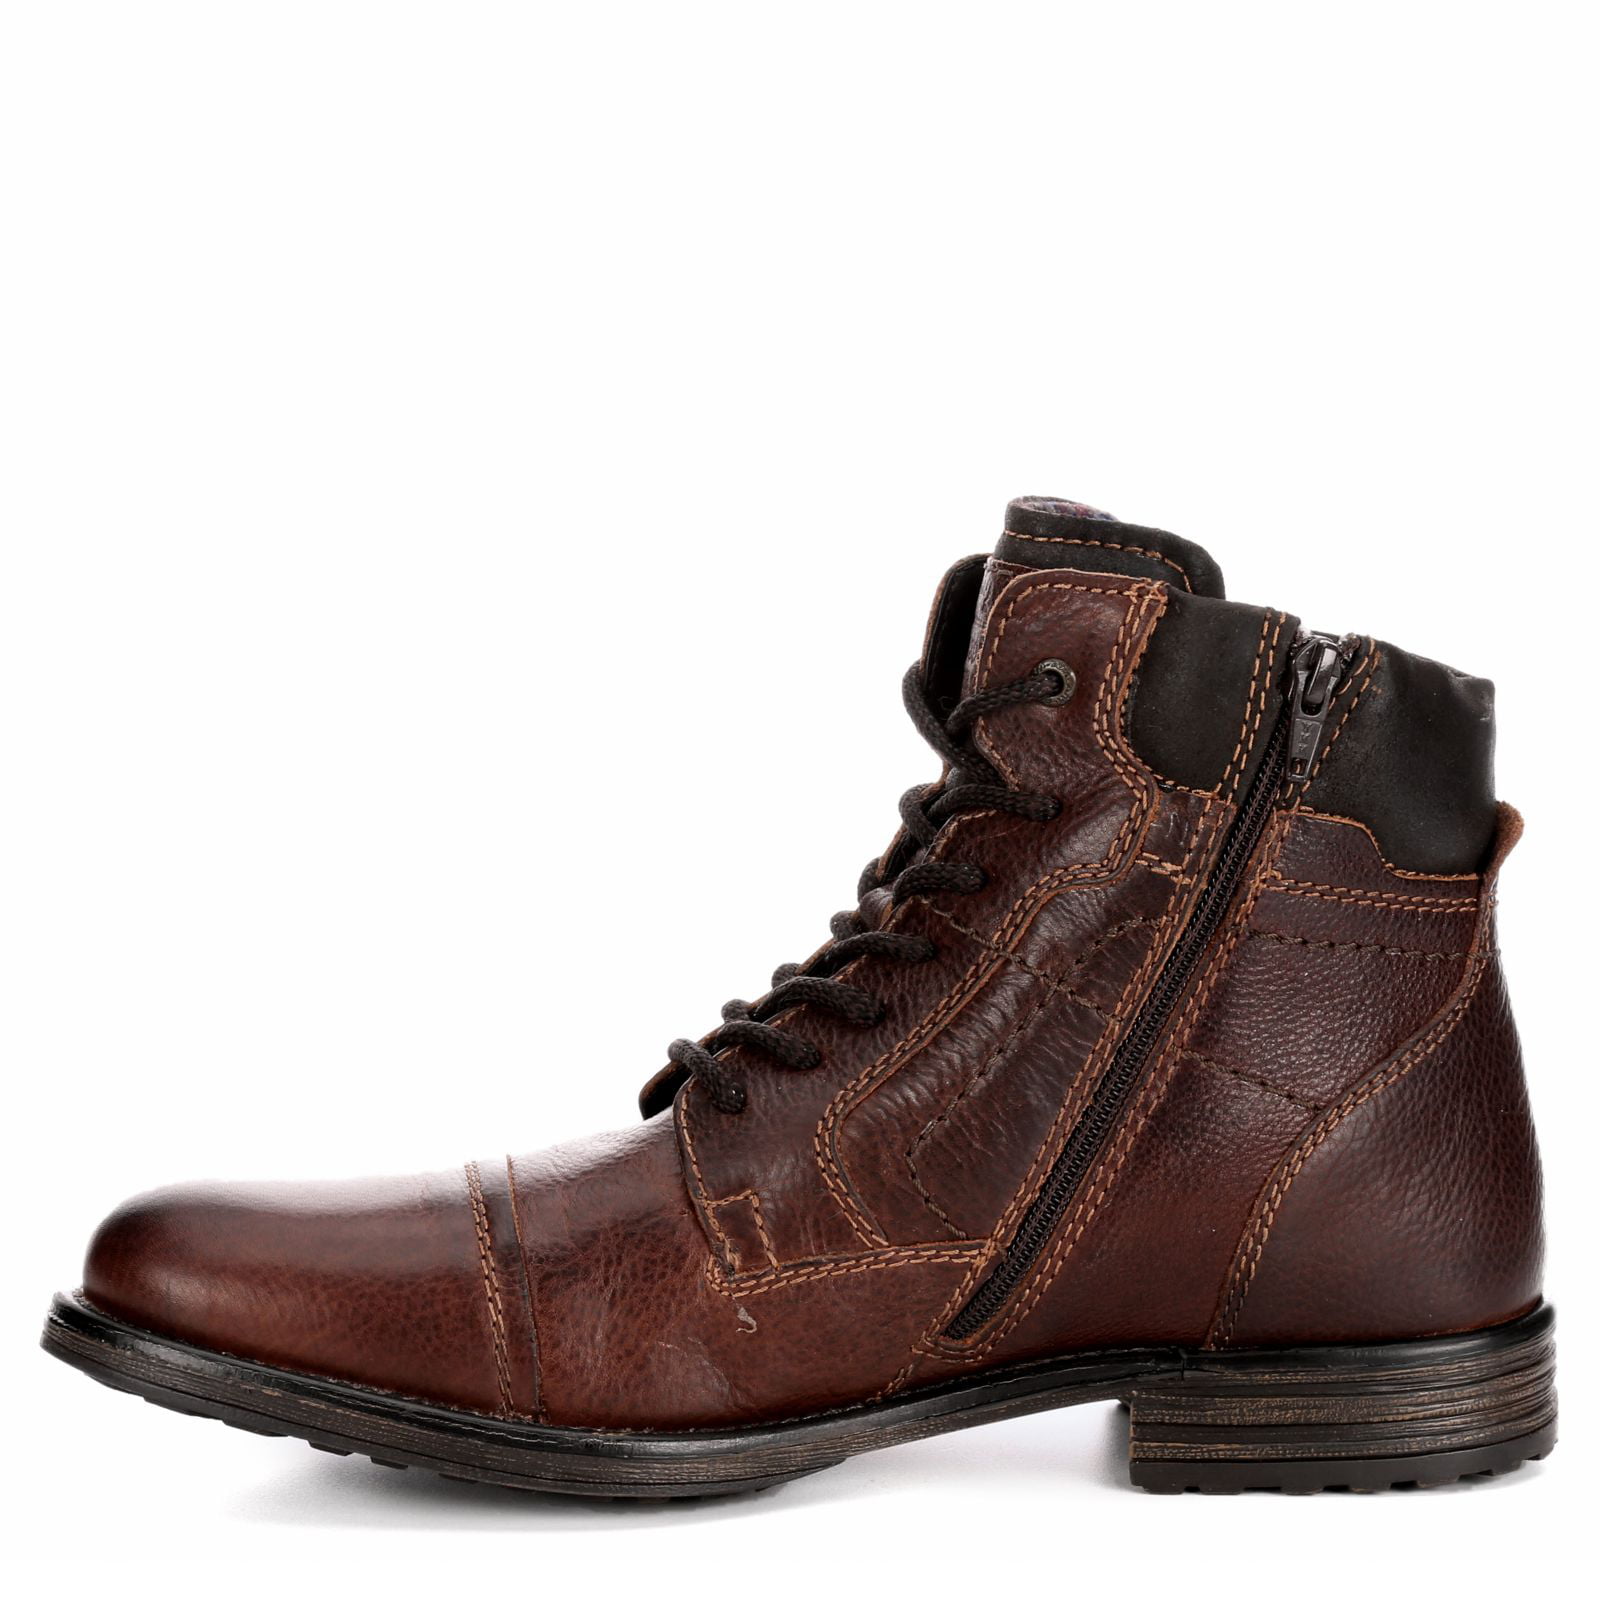 Mechanically core professional AM Shoes Mens Leather Cap Toe Lace Up Work Boot Shoes, Rust/Dark Brown, US  12 - Walmart.com